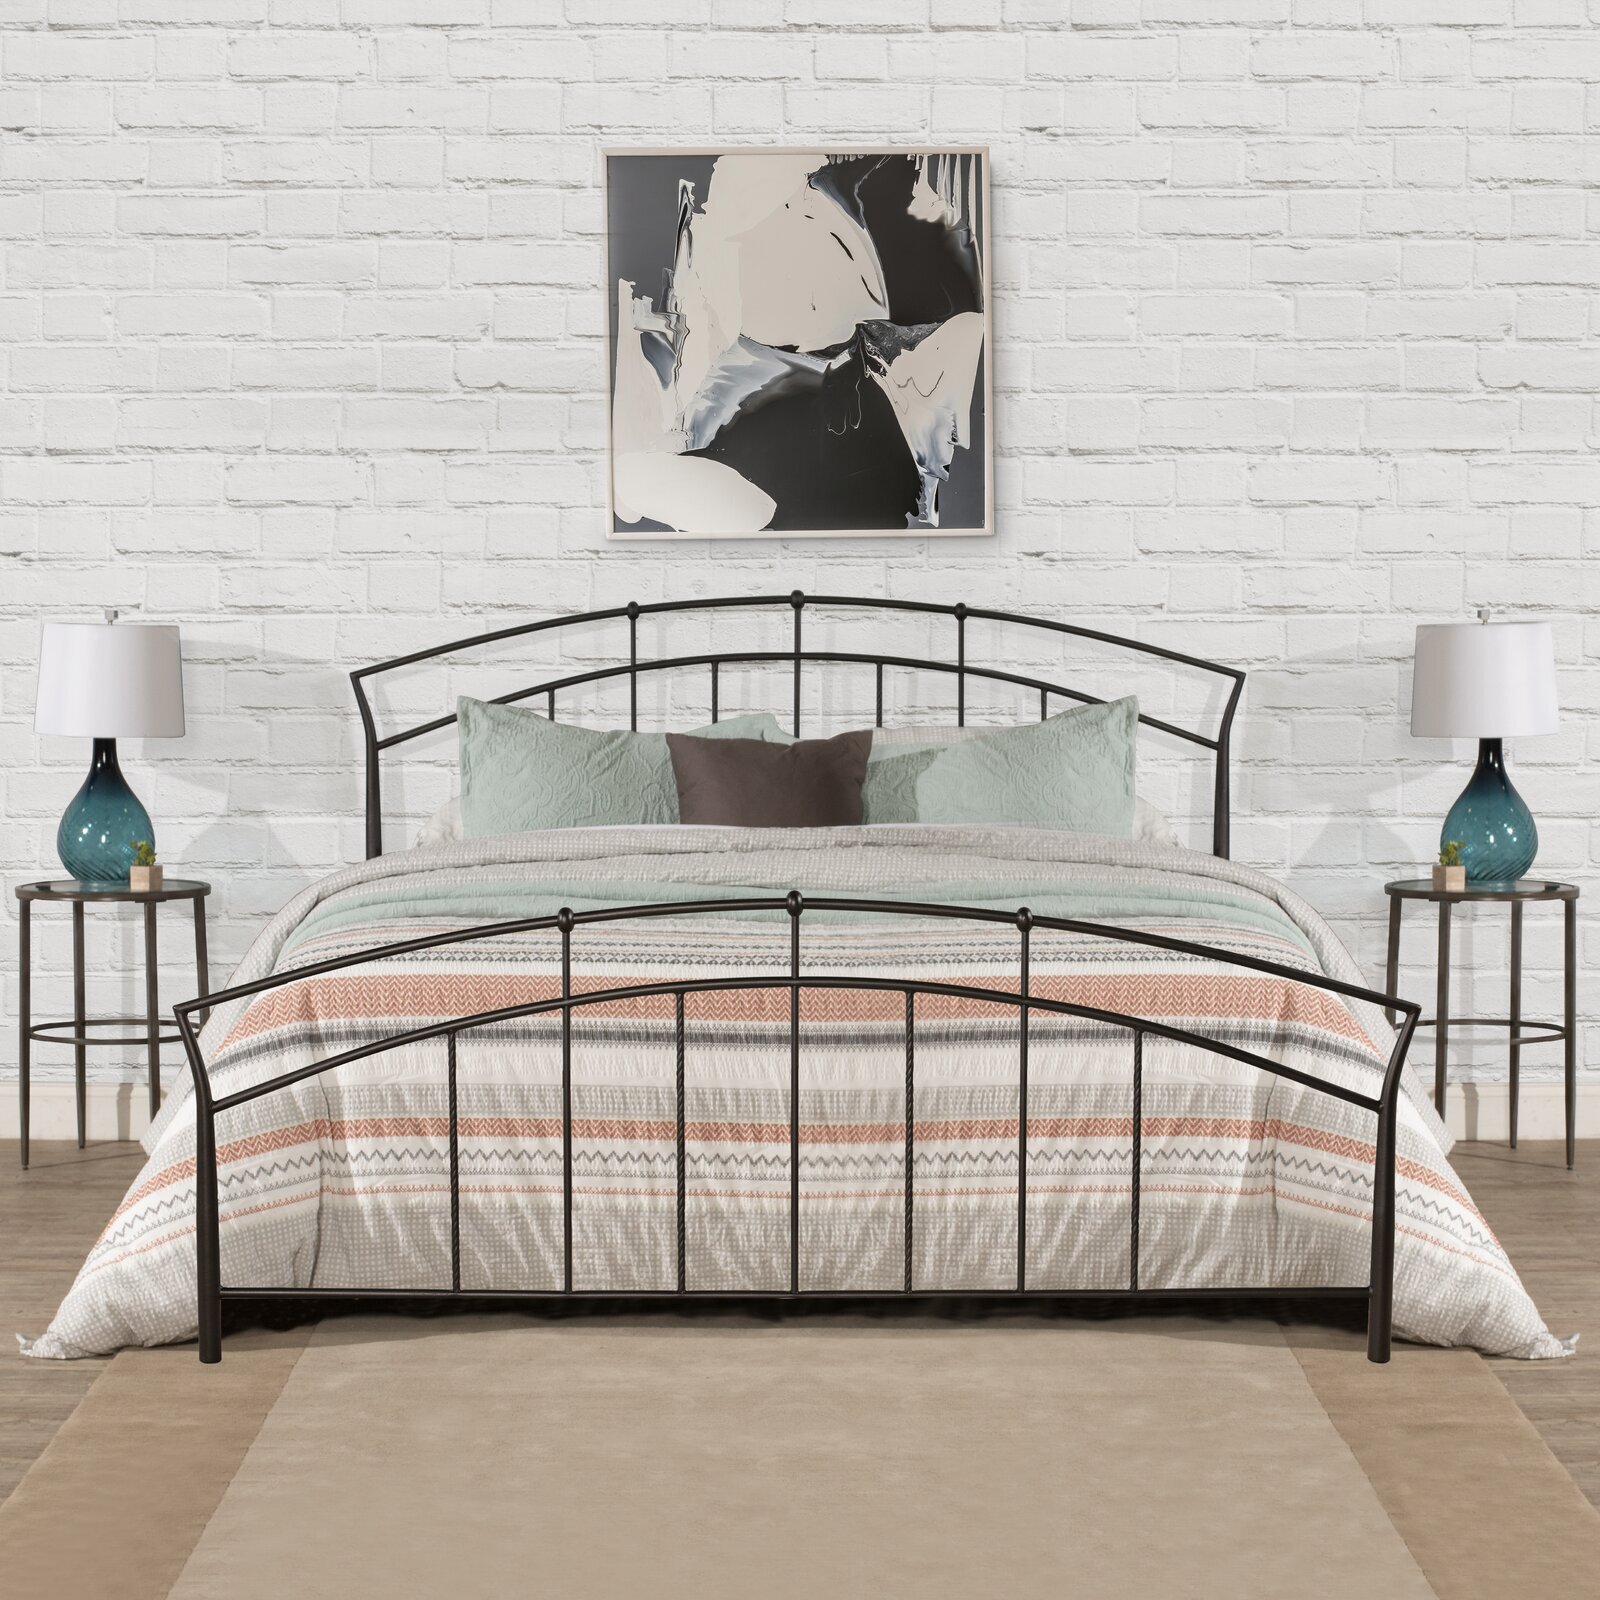 Simple Contemporary Wrought Iron King Bed